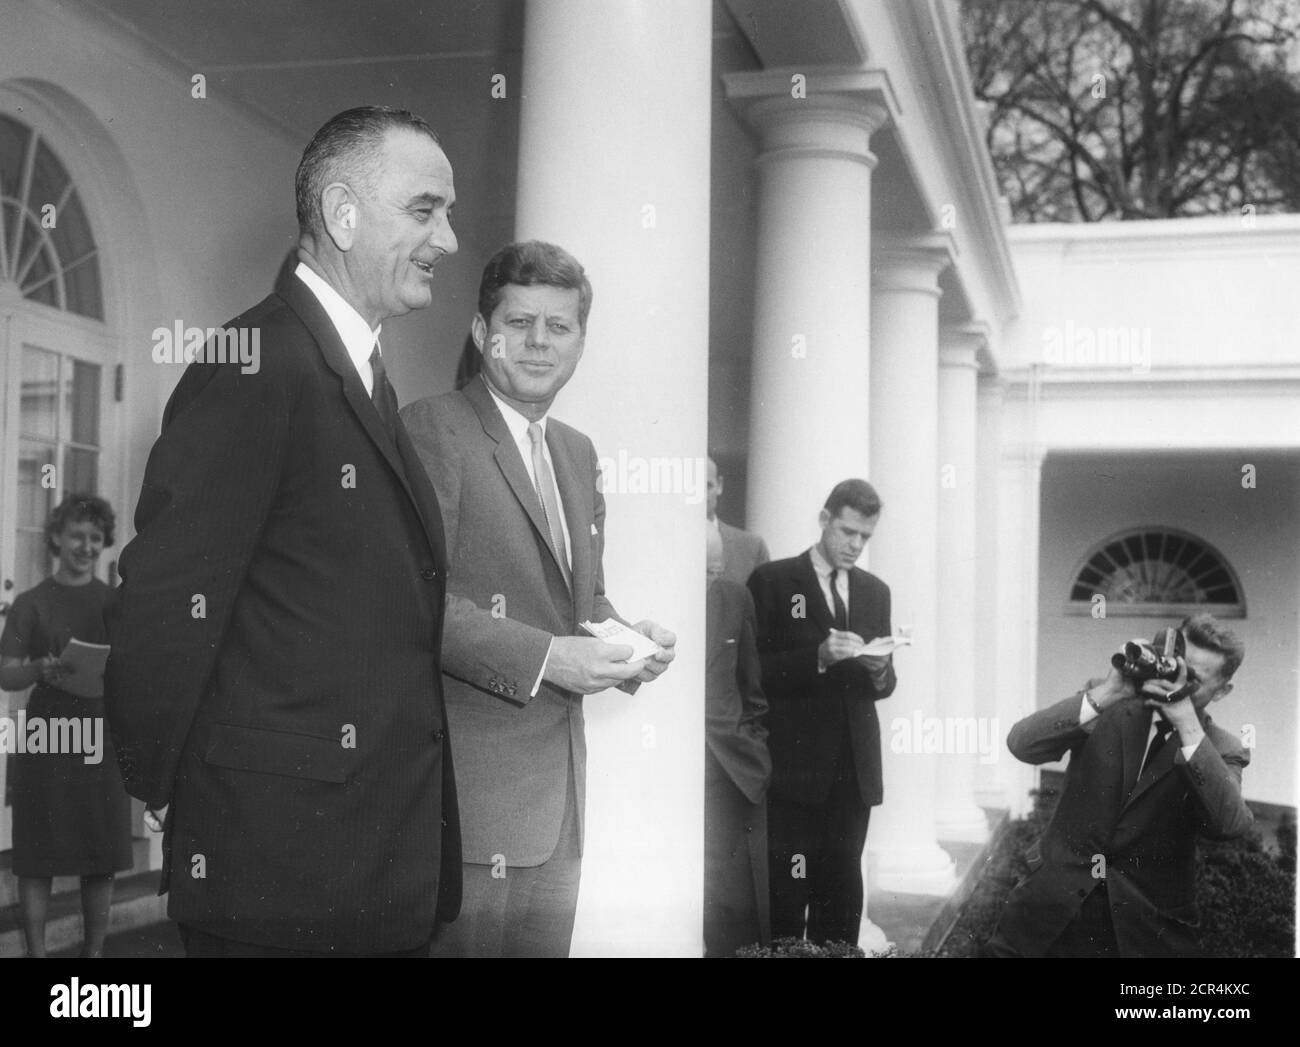 President John F Kennedy and Vice-President Lyndon B Johnson meet with the press in the White House Rose Garden after Kennedy signed Executive Order 10925 requiring government contractors to treat all qualified employees equally 'without regard to their race, creed, color or national origin,' Washington, DC, 03/06/1961. (Photo by Abbie Rowe/RBM Vintage Images) Stock Photo